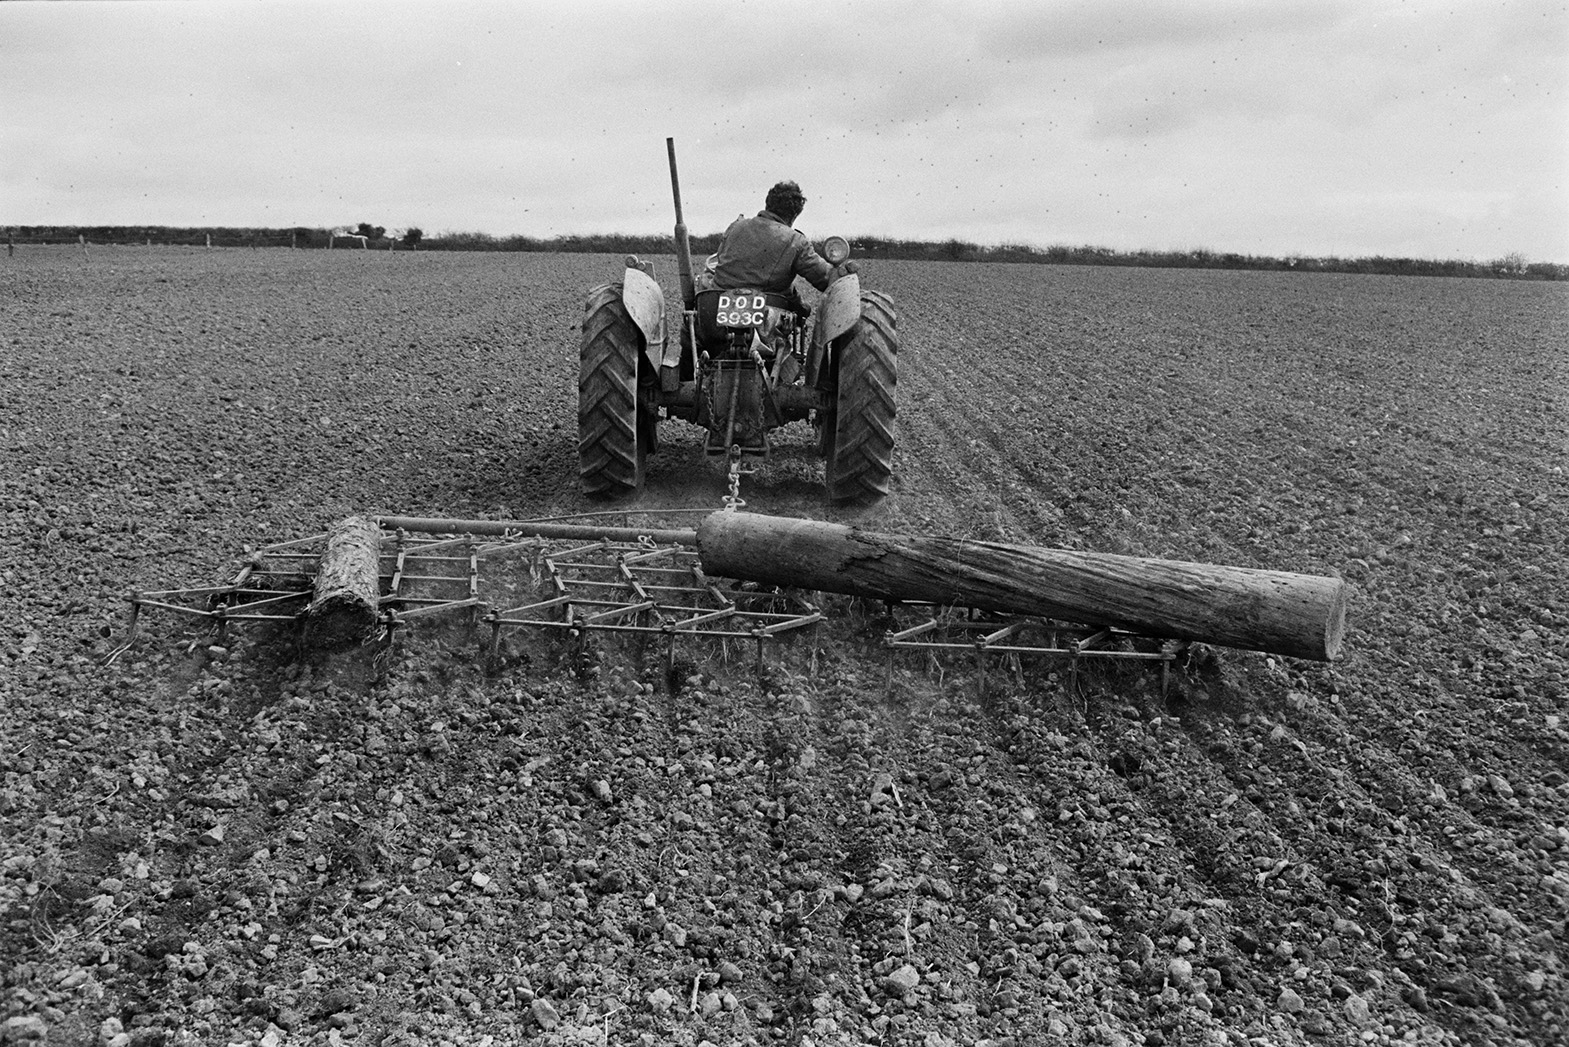 A man dragging a harrow over a field at Mill Road Farm, Beaford to cover corn seed. A log is on top of the harrow to weight it down. The farm was also known as Jeffrys.